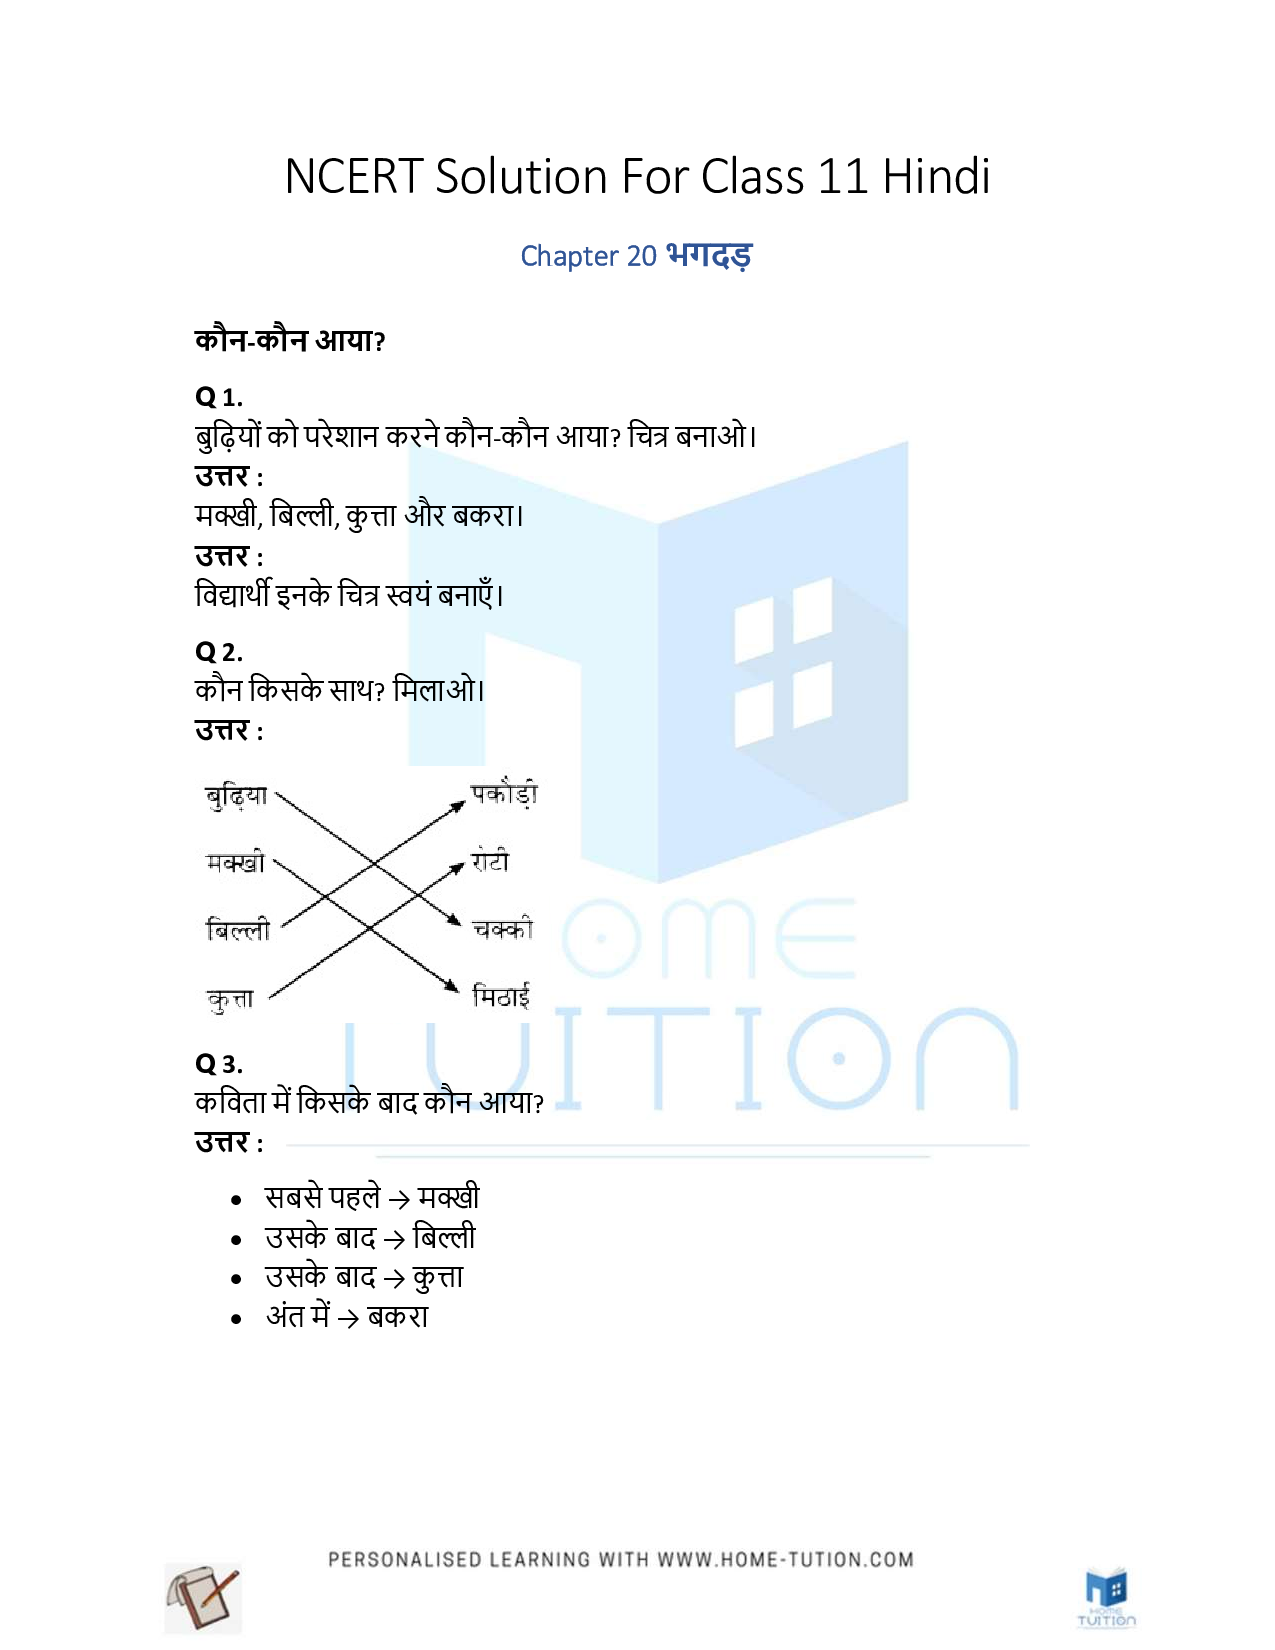 NCERT Solution for Class 1 Hindi Chapter 20 Bhagdad (भगदड़)